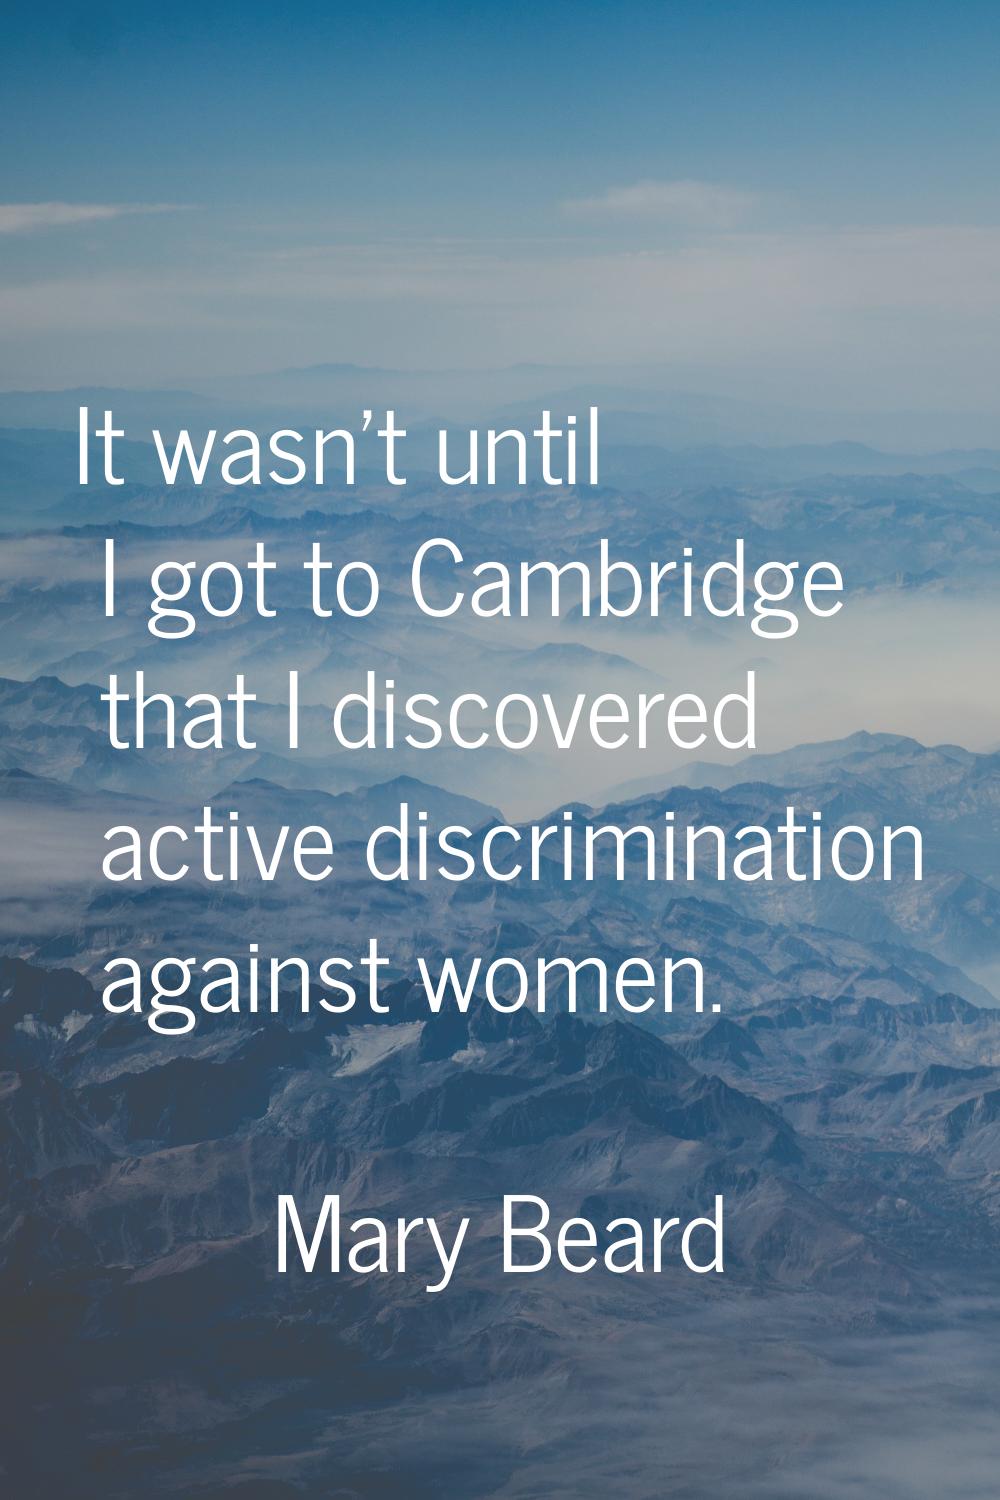 It wasn't until I got to Cambridge that I discovered active discrimination against women.